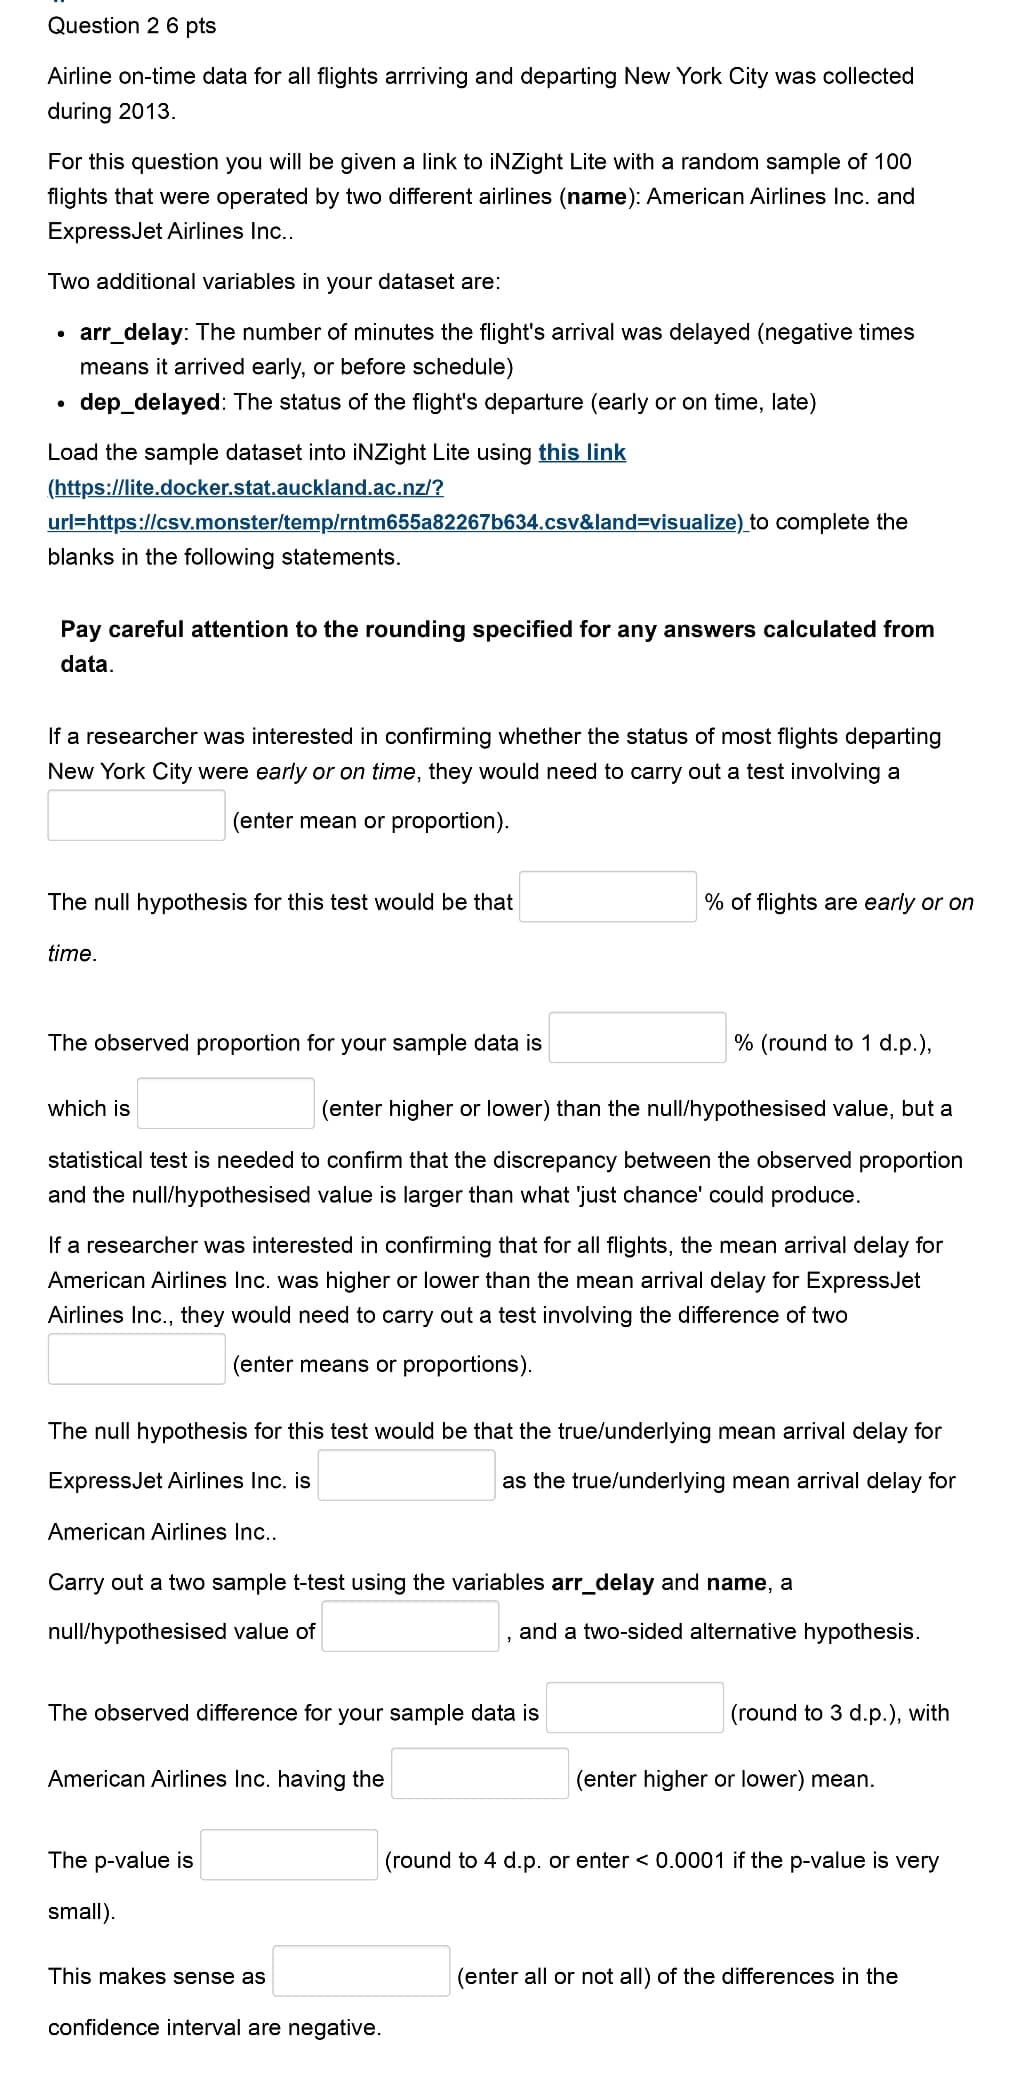 Question 2 6 pts
Airline on-time data for all flights arrriving and departing New York City was collected
during 2013.
For this question you will be given a link to iNZight Lite with a random sample of 100
flights that were operated by two different airlines (name): American Airlines Inc. and
ExpressJet Airlines Inc..
Two additional variables in your dataset are:
•
•
arr_delay: The number of minutes the flight's arrival was delayed (negative times
means it arrived early, or before schedule)
dep_delayed: The status of the flight's departure (early or on time, late)
Load the sample dataset into iNZight Lite using this link
(https://lite.docker.stat.auckland.ac.nz/?
url=https://csv.monster/temp/rntm655a82267b634.csv&land=visualize) to complete the
blanks in the following statements.
Pay careful attention to the rounding specified for any answers calculated from
data.
If a researcher was interested in confirming whether the status of most flights departing
New York City were early or on time, they would need to carry out a test involving a
(enter mean or proportion).
The null hypothesis for this test would be that
% of flights are early or on
time.
The observed proportion for your sample data is
which is
% (round to 1 d.p.),
(enter higher or lower) than the null/hypothesised value, but a
statistical test is needed to confirm that the discrepancy between the observed proportion
and the null/hypothesised value is larger than what 'just chance' could produce.
If a researcher was interested in confirming that for all flights, the mean arrival delay for
American Airlines Inc. was higher or lower than the mean arrival delay for ExpressJet
Airlines Inc., they would need to carry out a test involving the difference of two
(enter means or proportions).
The null hypothesis for this test would be that the true/underlying mean arrival delay for
ExpressJet Airlines Inc. is
American Airlines Inc..
as the true/underlying mean arrival delay for
Carry out a two sample t-test using the variables arr_delay and name, a
null/hypothesised value of
and a two-sided alternative hypothesis.
(round to 3 d.p.), with
(enter higher or lower) mean.
The observed difference for your sample data is
American Airlines Inc. having the
The p-value is
(round to 4 d.p. or enter <0.0001 if the p-value is very
small).
This makes sense as
confidence interval are negative.
(enter all or not all) of the differences in the